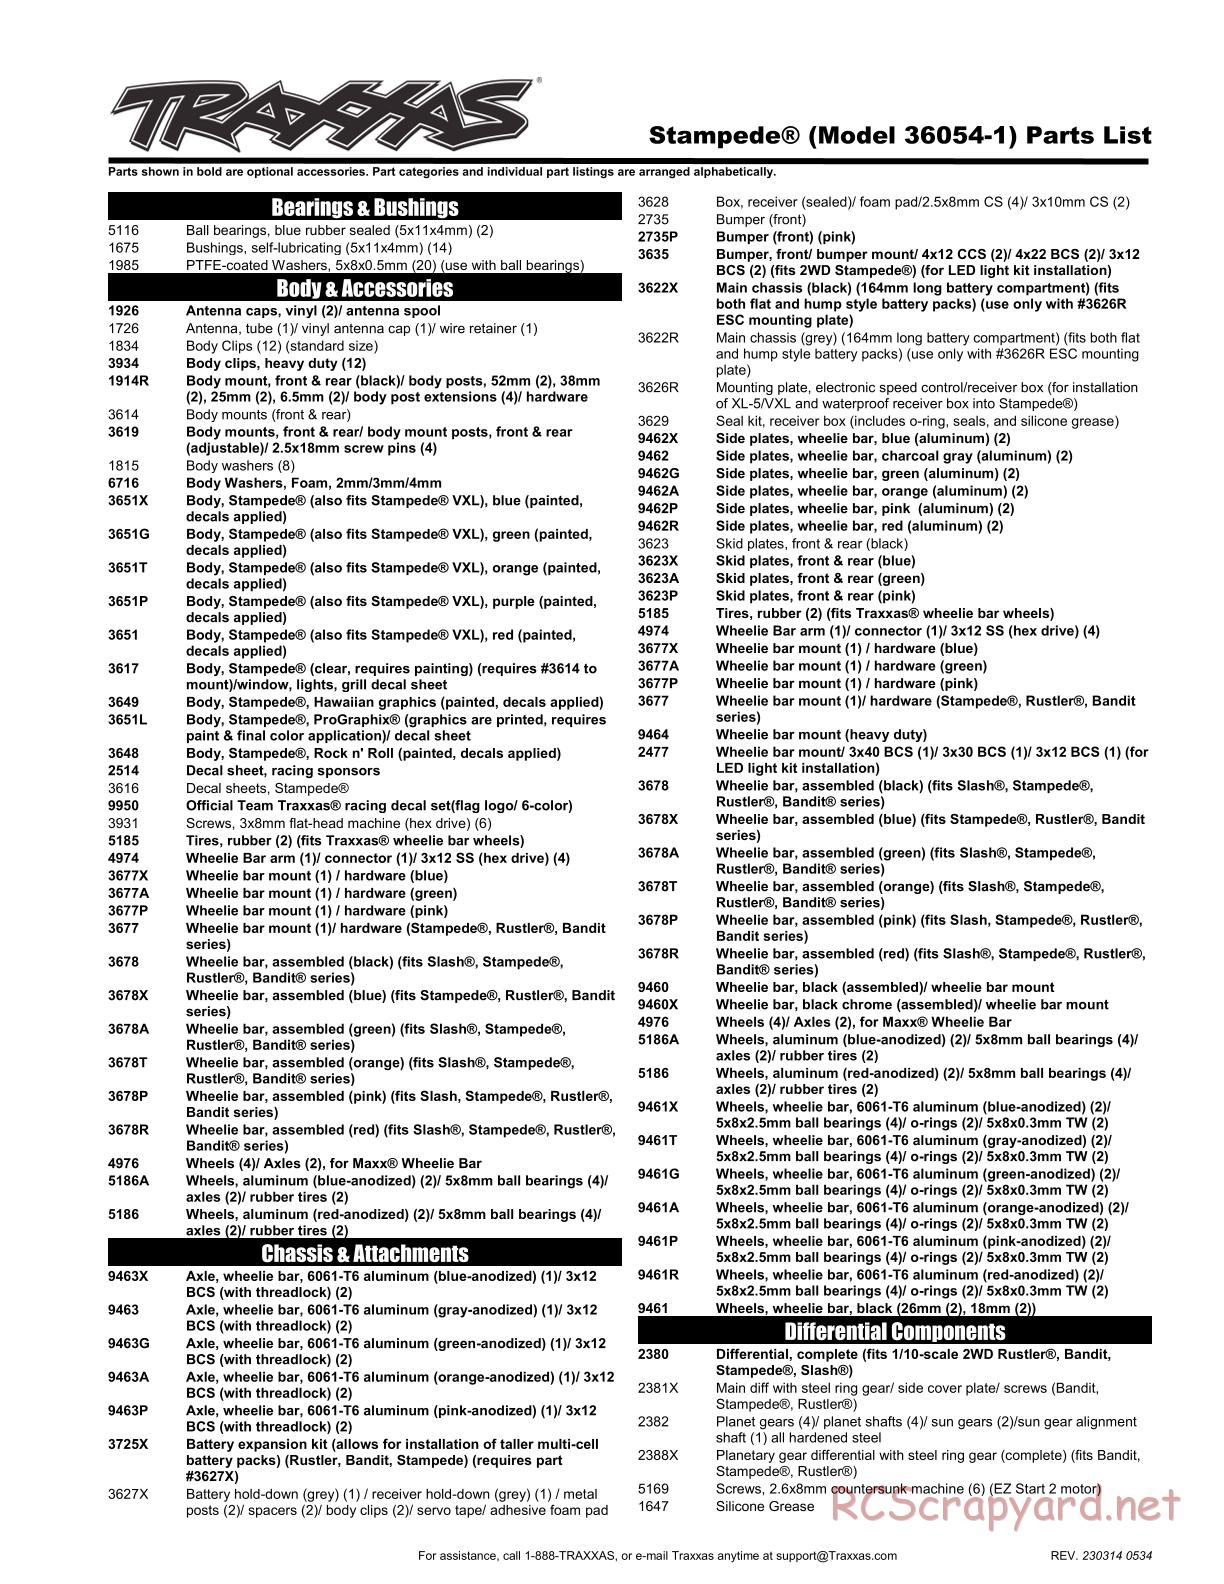 Traxxas - Stampede XL-5 (2015) - Parts List - Page 1